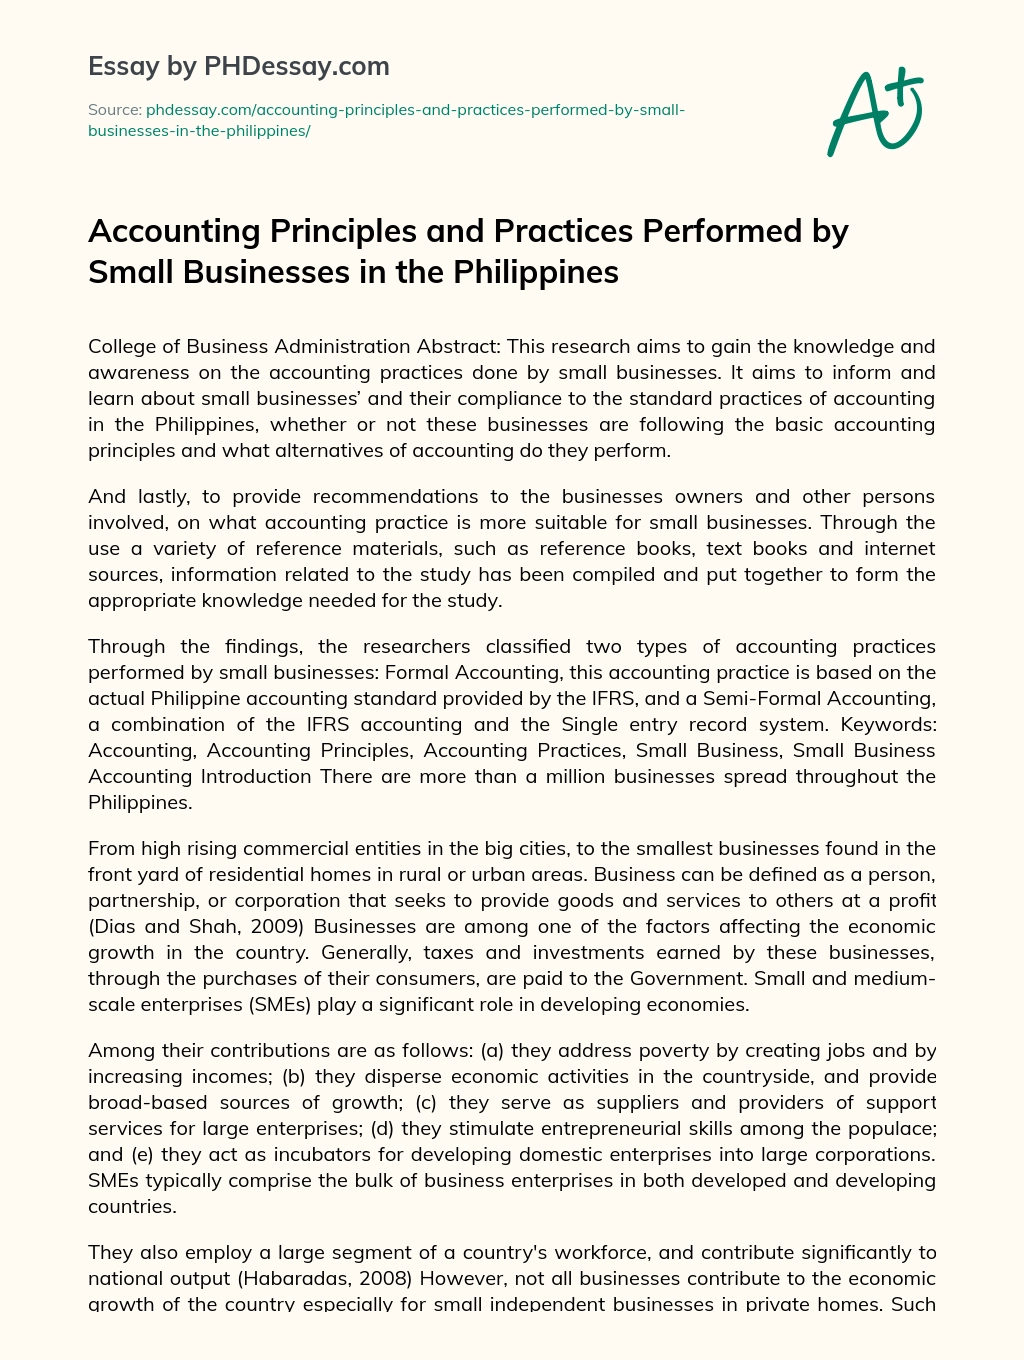 Accounting Principles and Practices Performed by Small Businesses in the Philippines essay